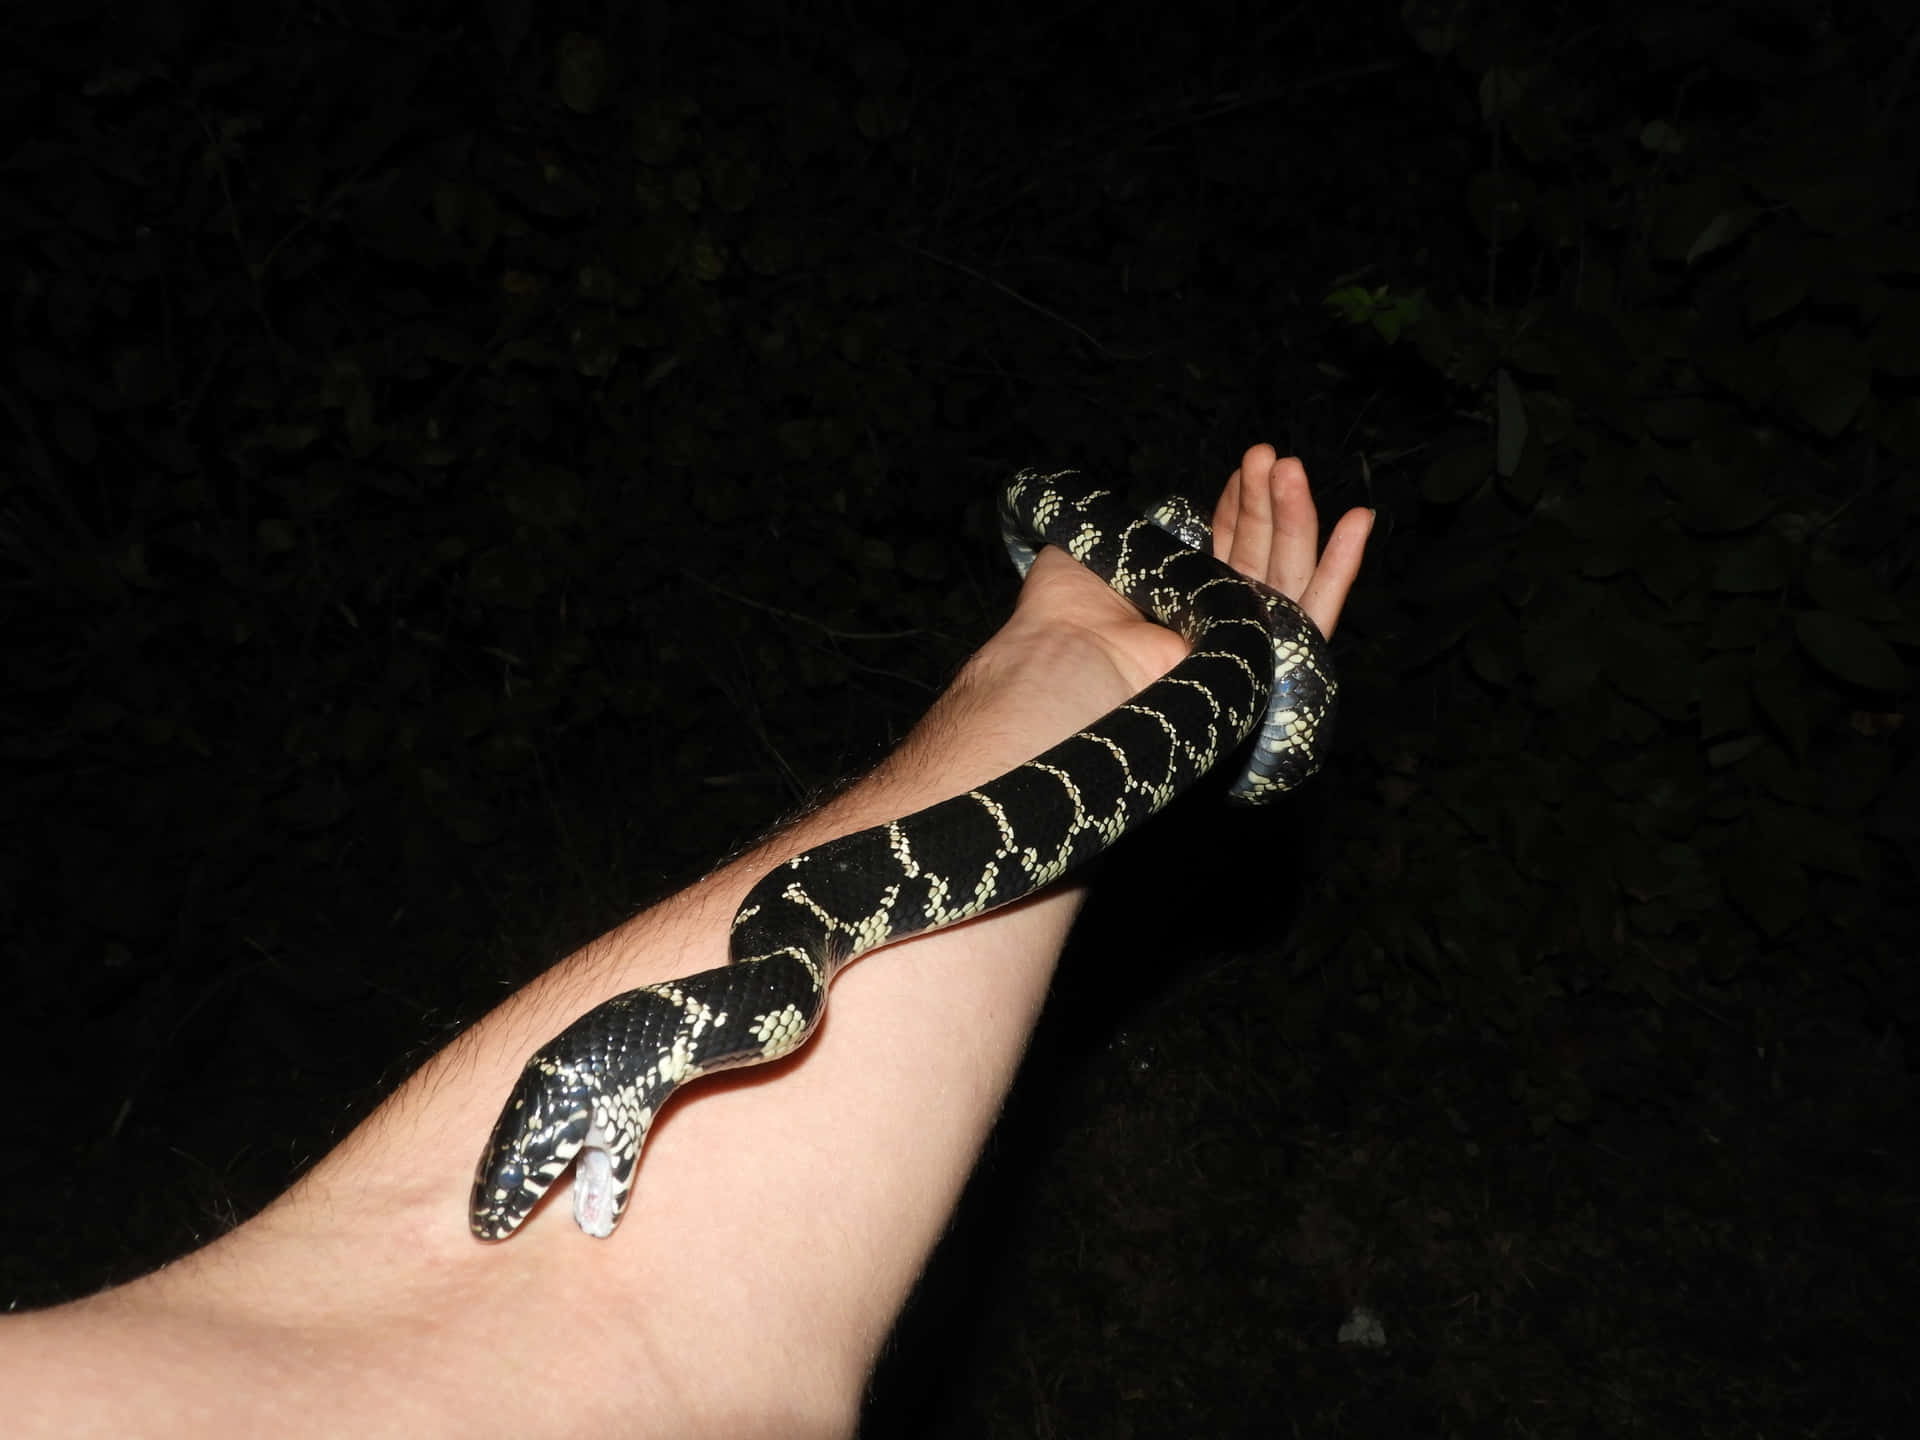 A Black And White Snake Is Held In A Person's Hand